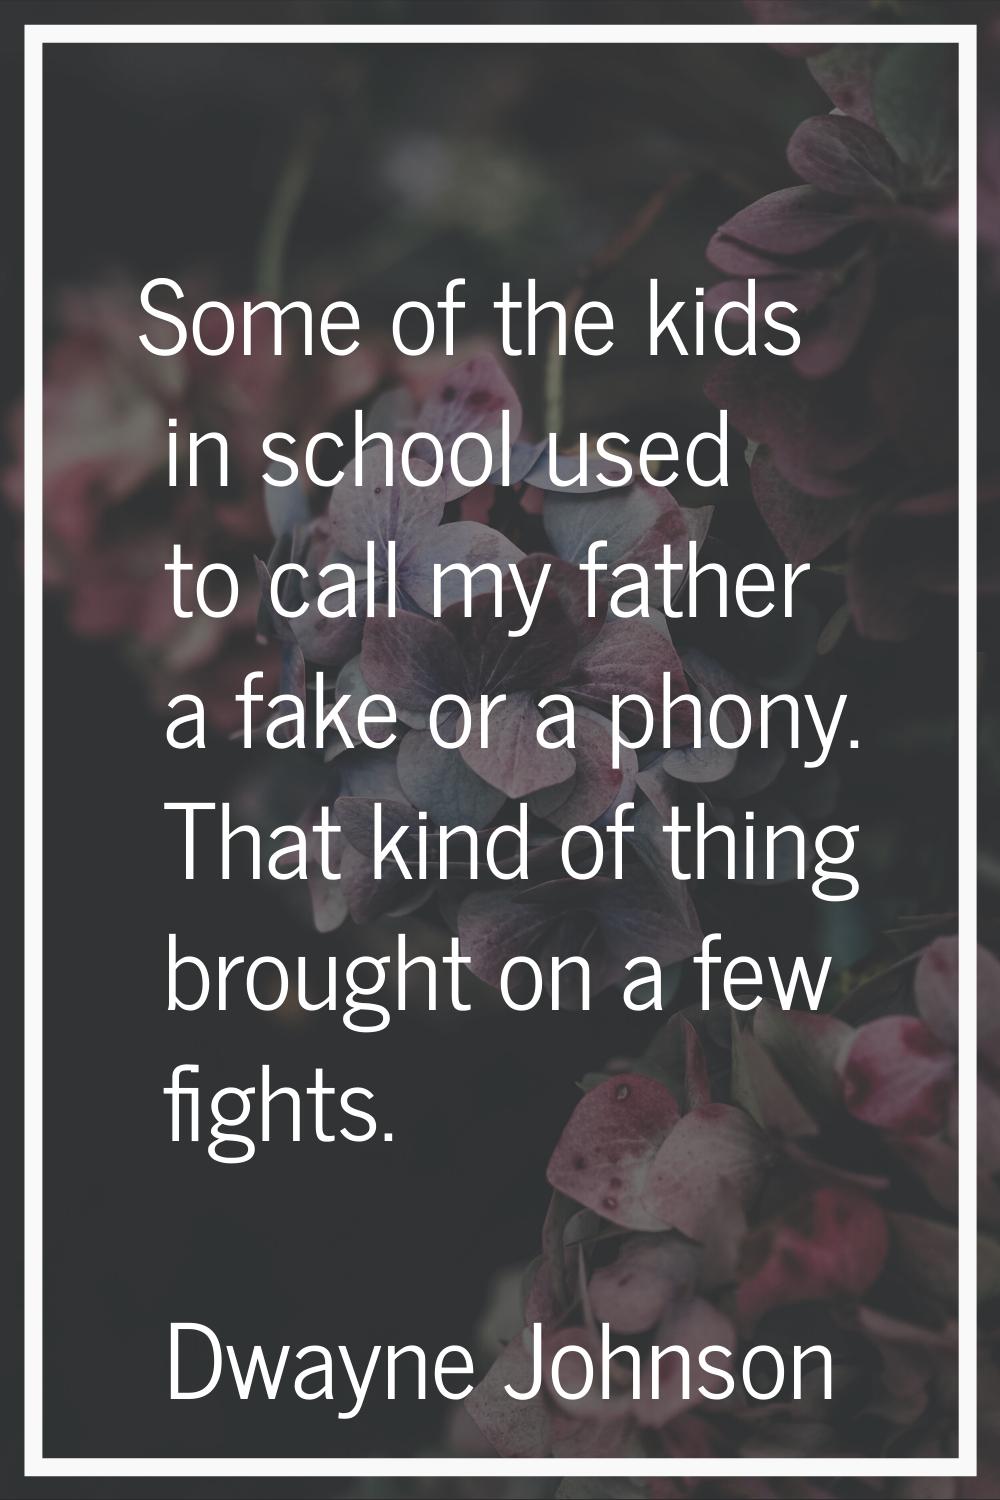 Some of the kids in school used to call my father a fake or a phony. That kind of thing brought on 